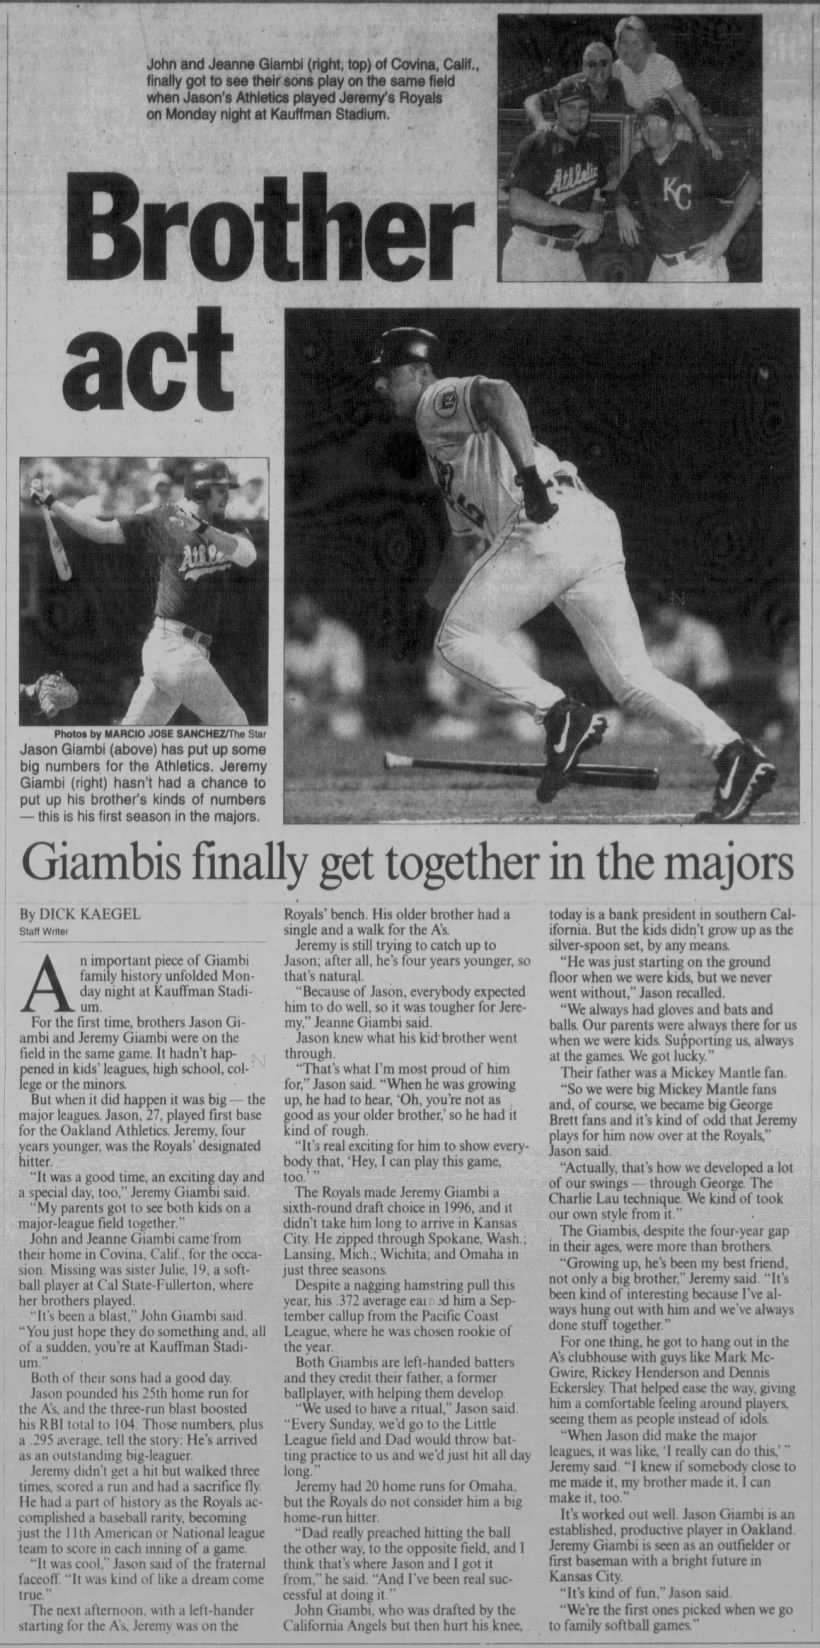 Brother act: Giambis finally get together in the majors